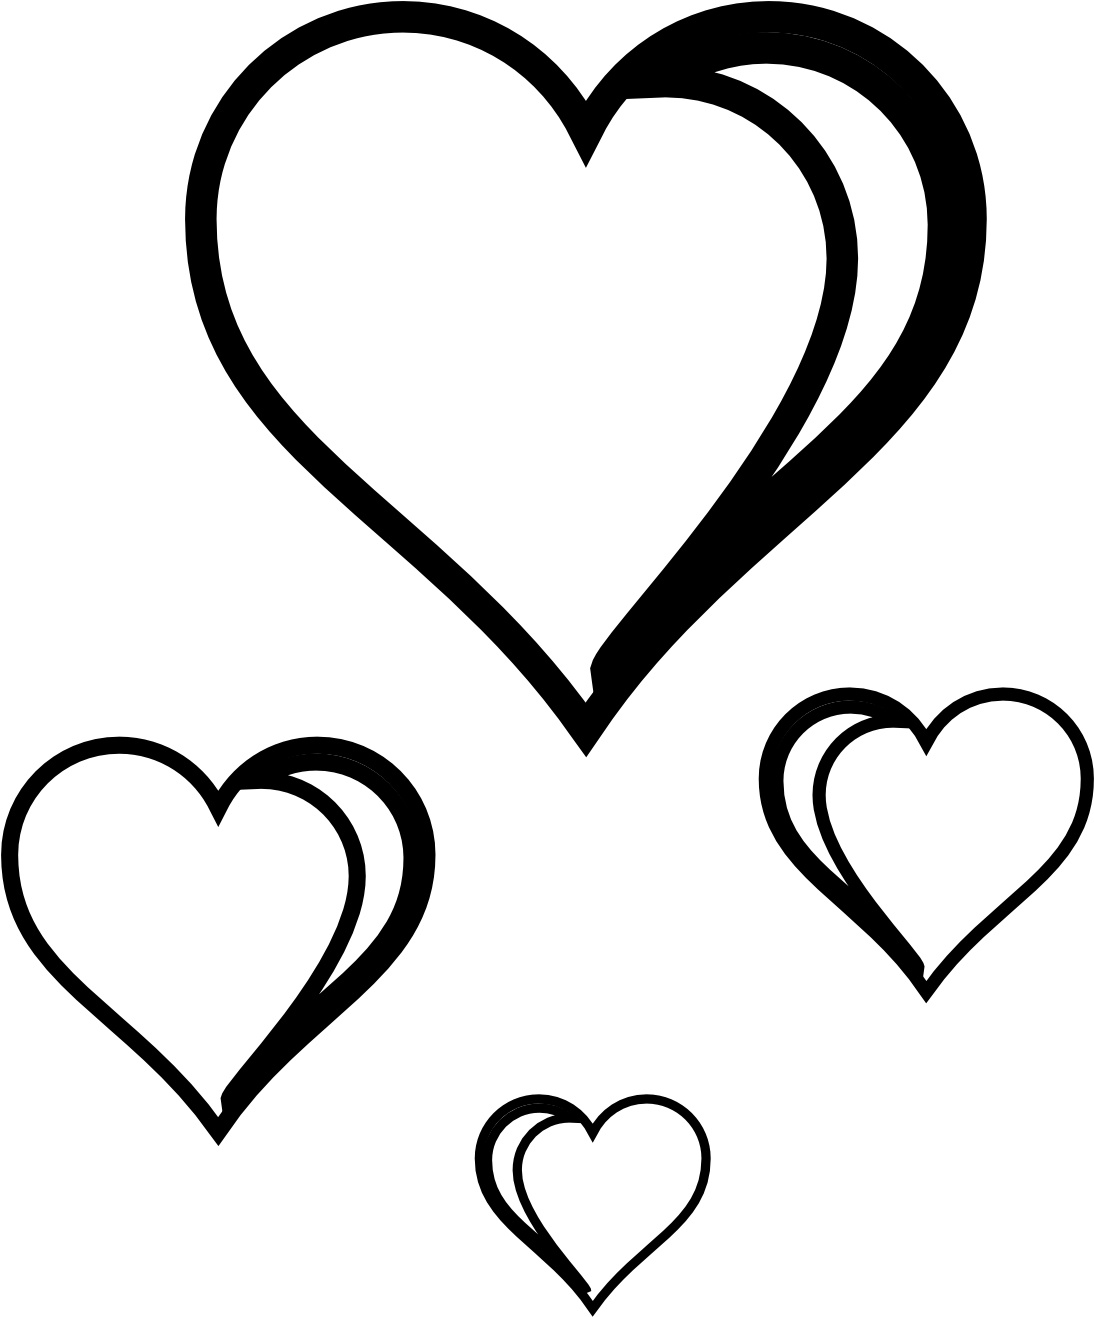 Hearts Clipart Black And White - Hearts Clip Art Black And White (1111x1332)